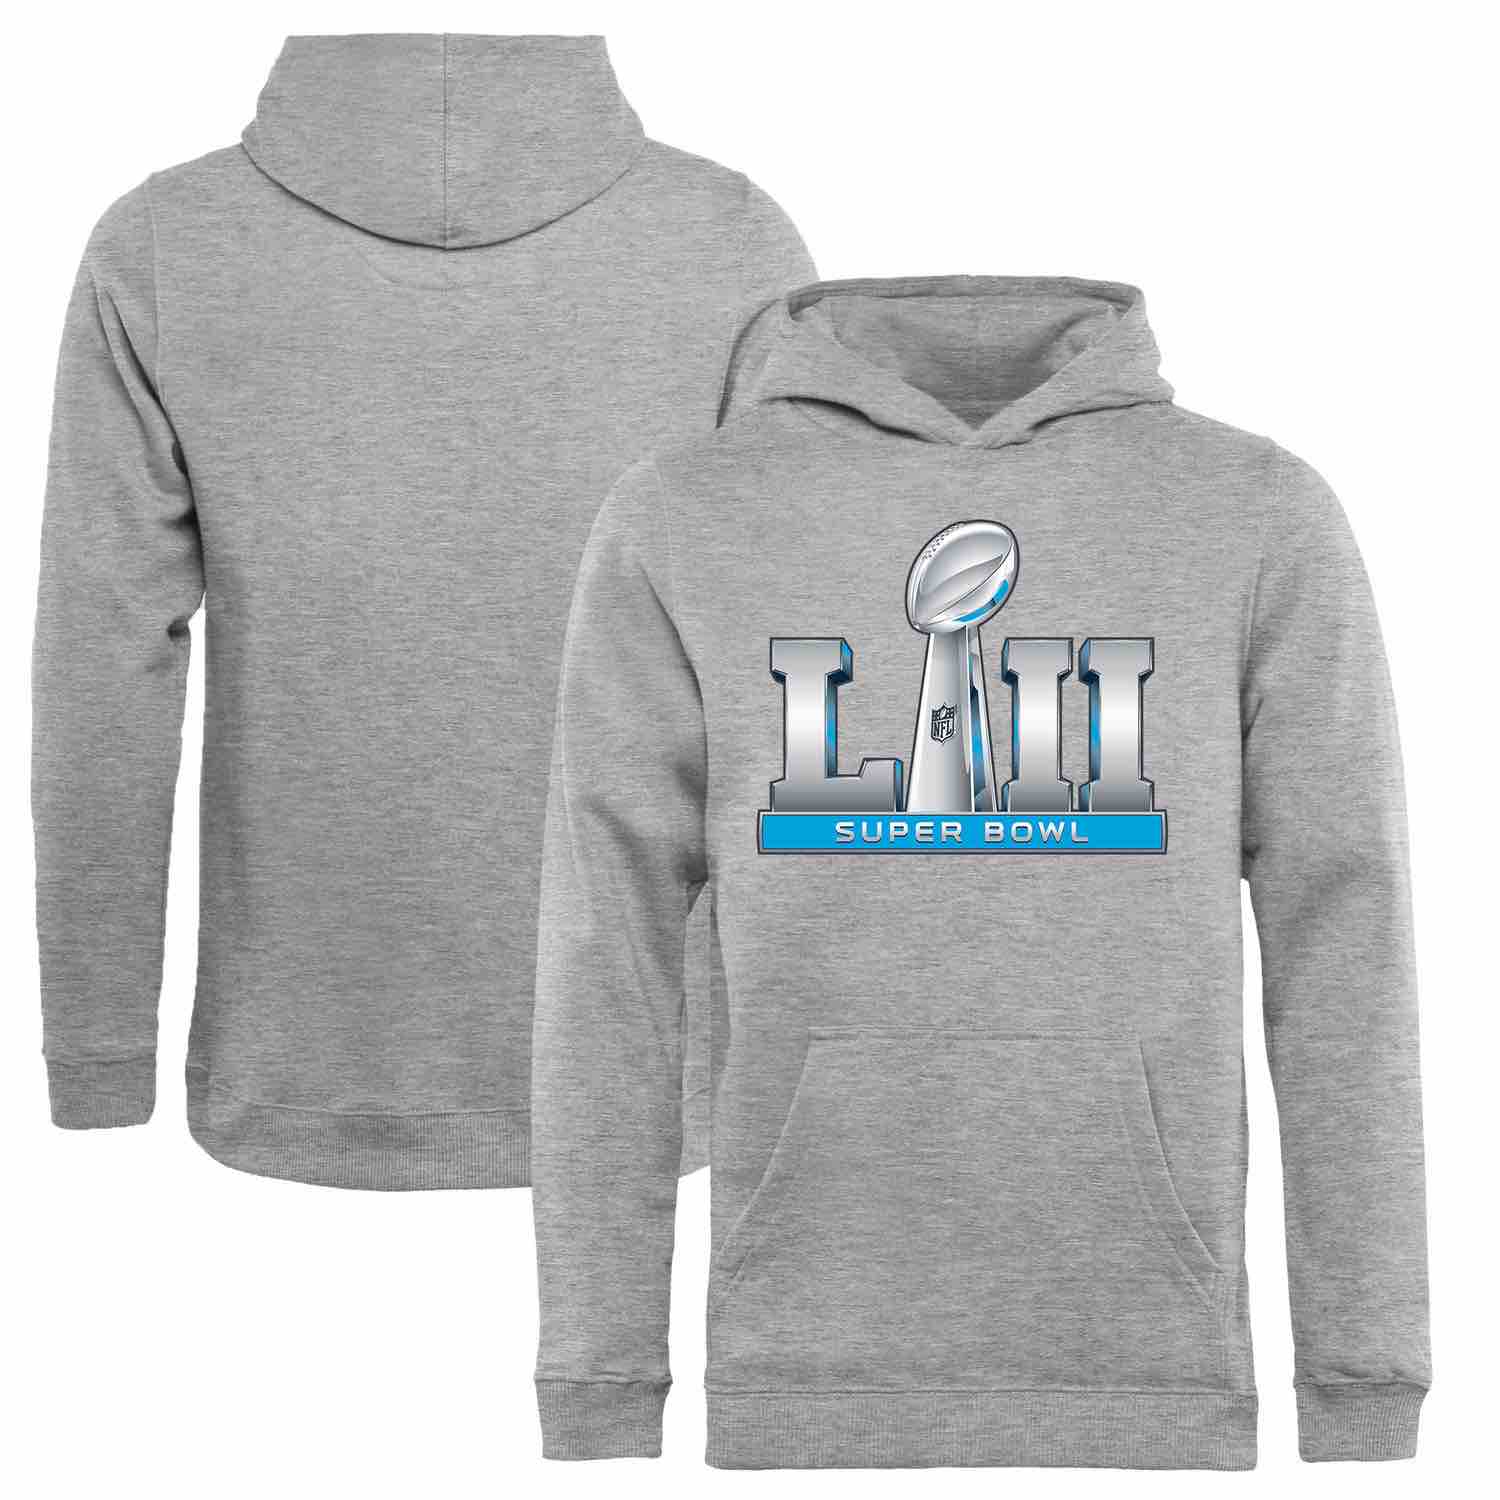 Youth NFL Pro Line by Fanatics Branded Heather Gray Super Bowl LII Event Pullover Hoodie